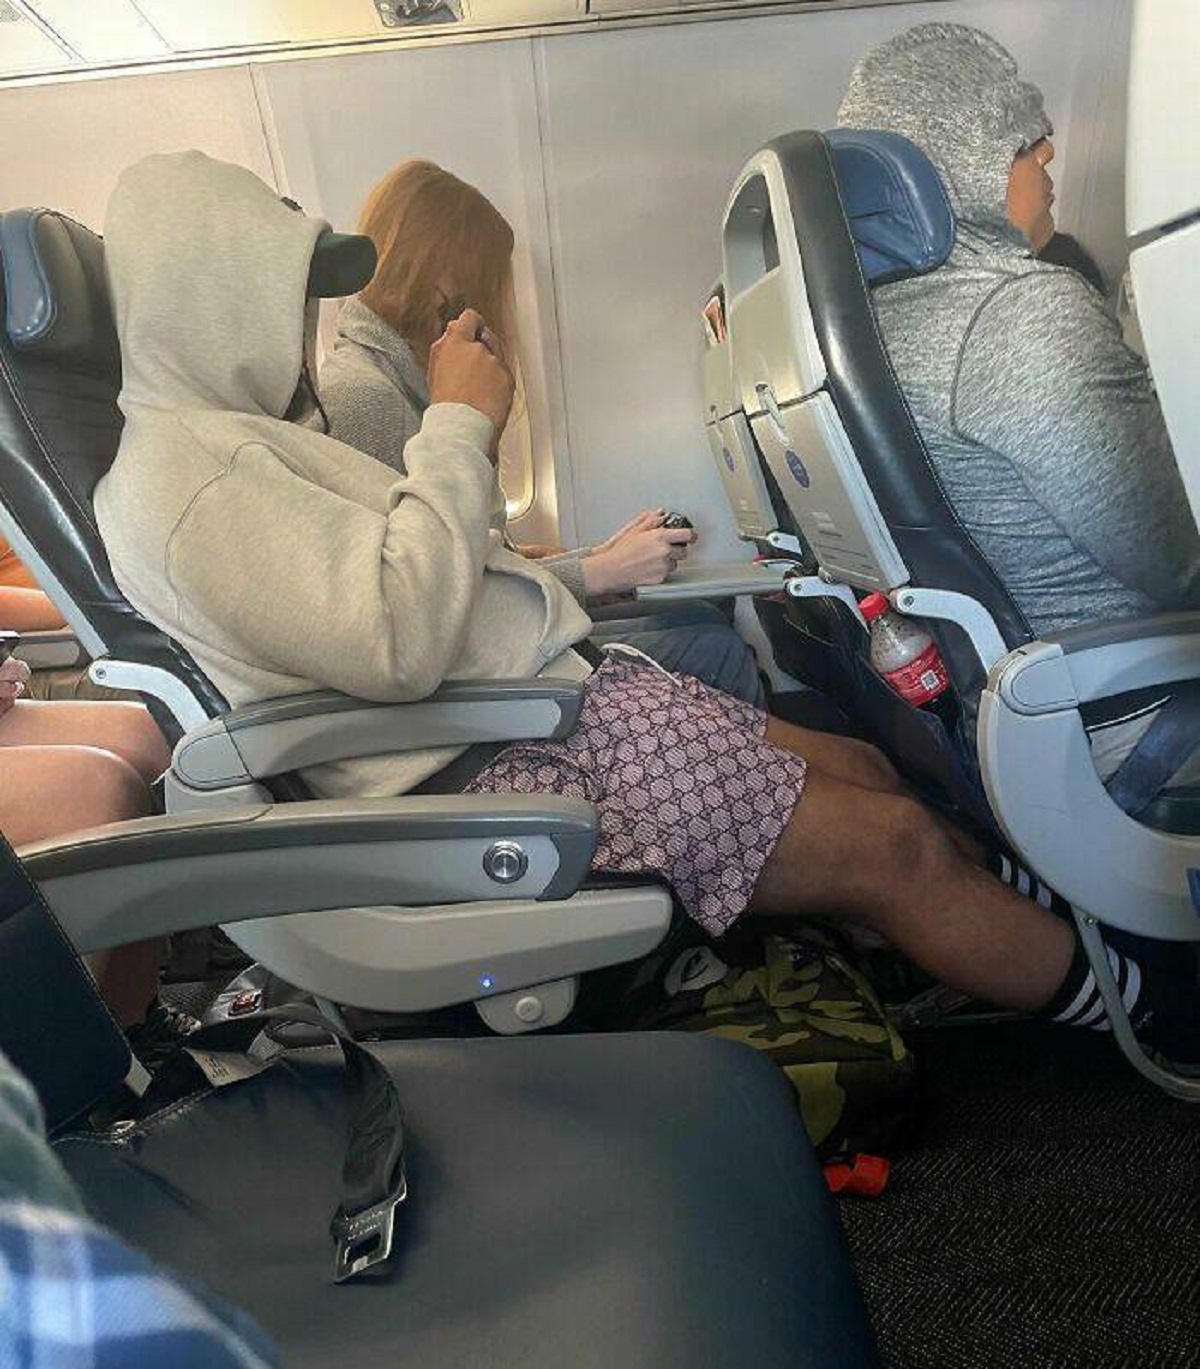 "Delayed For 3 Hours… Just To Have This Guy Blasting A Movie On His Phone The Whole Flight. Flight Attendants Did Nothing"